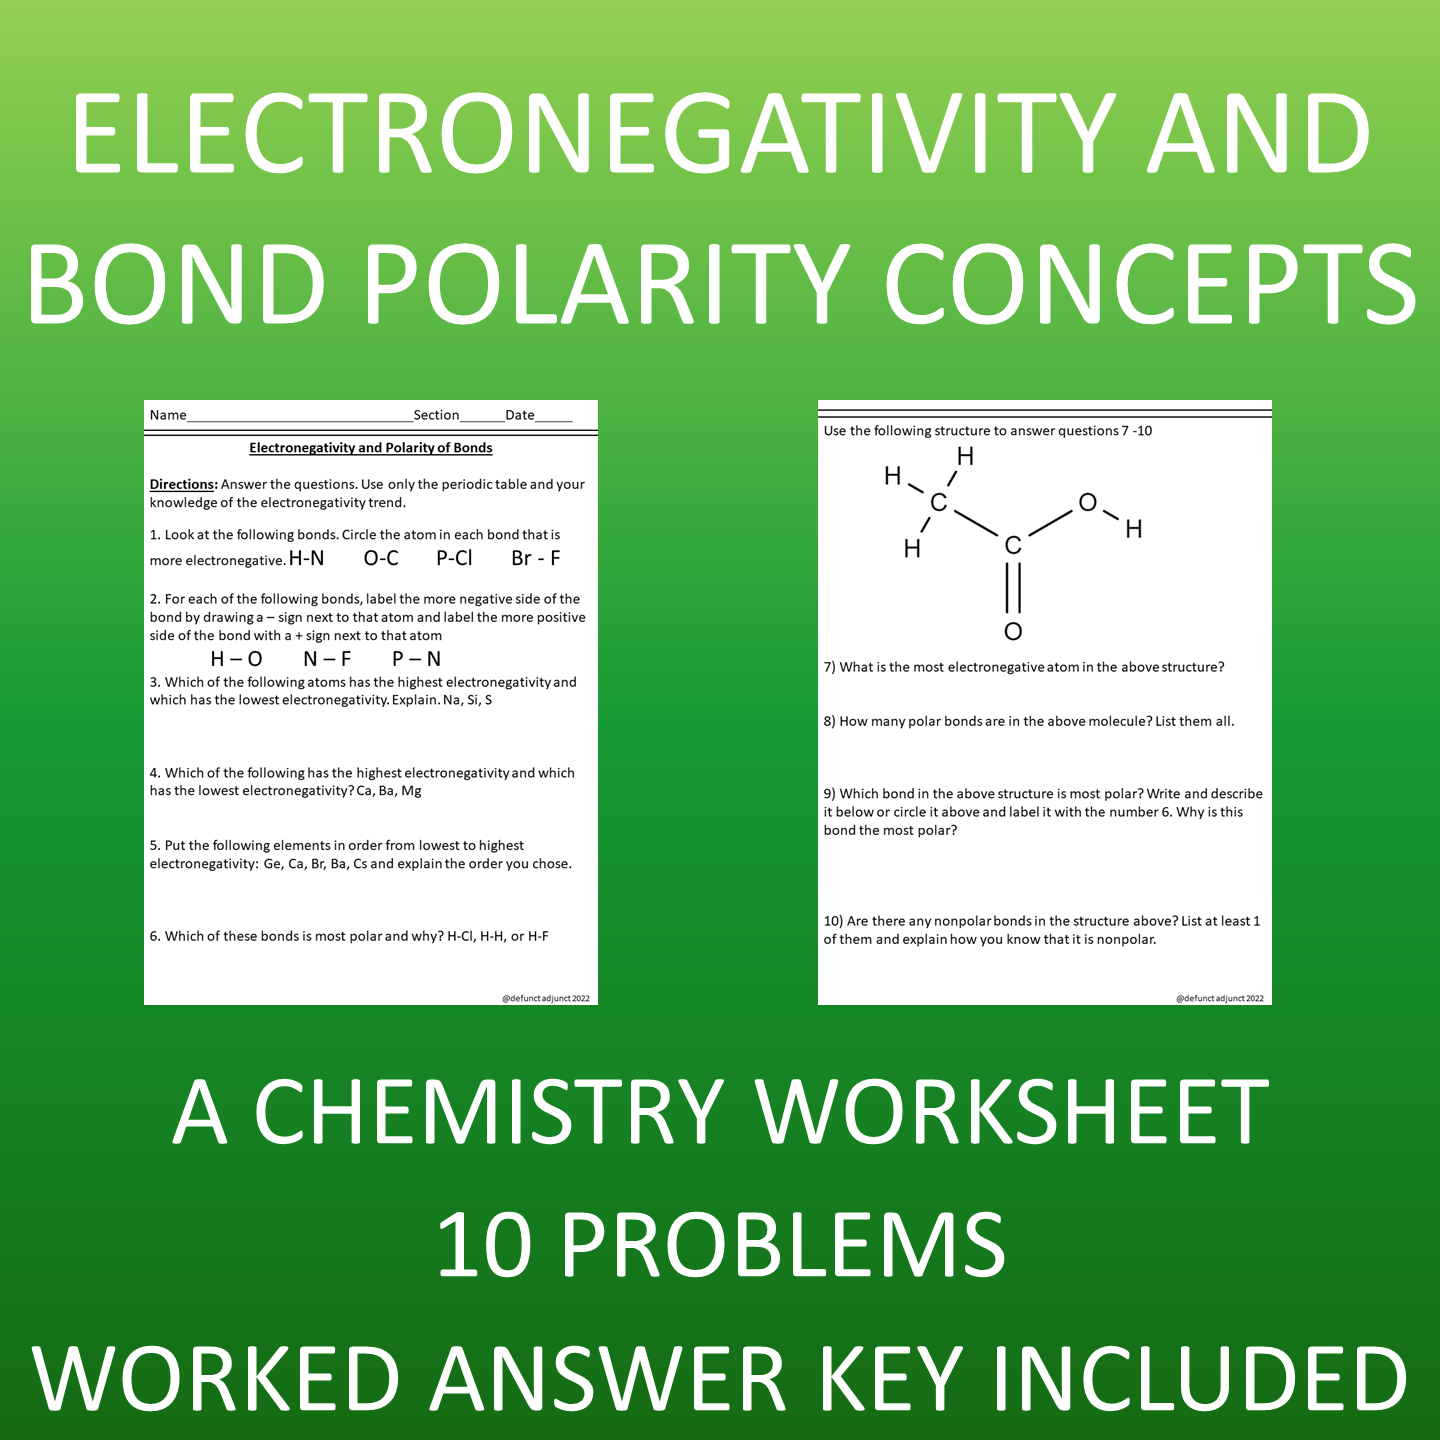 Electronegativity and Bond Polarity- a Chemistry Worksheet - Classful